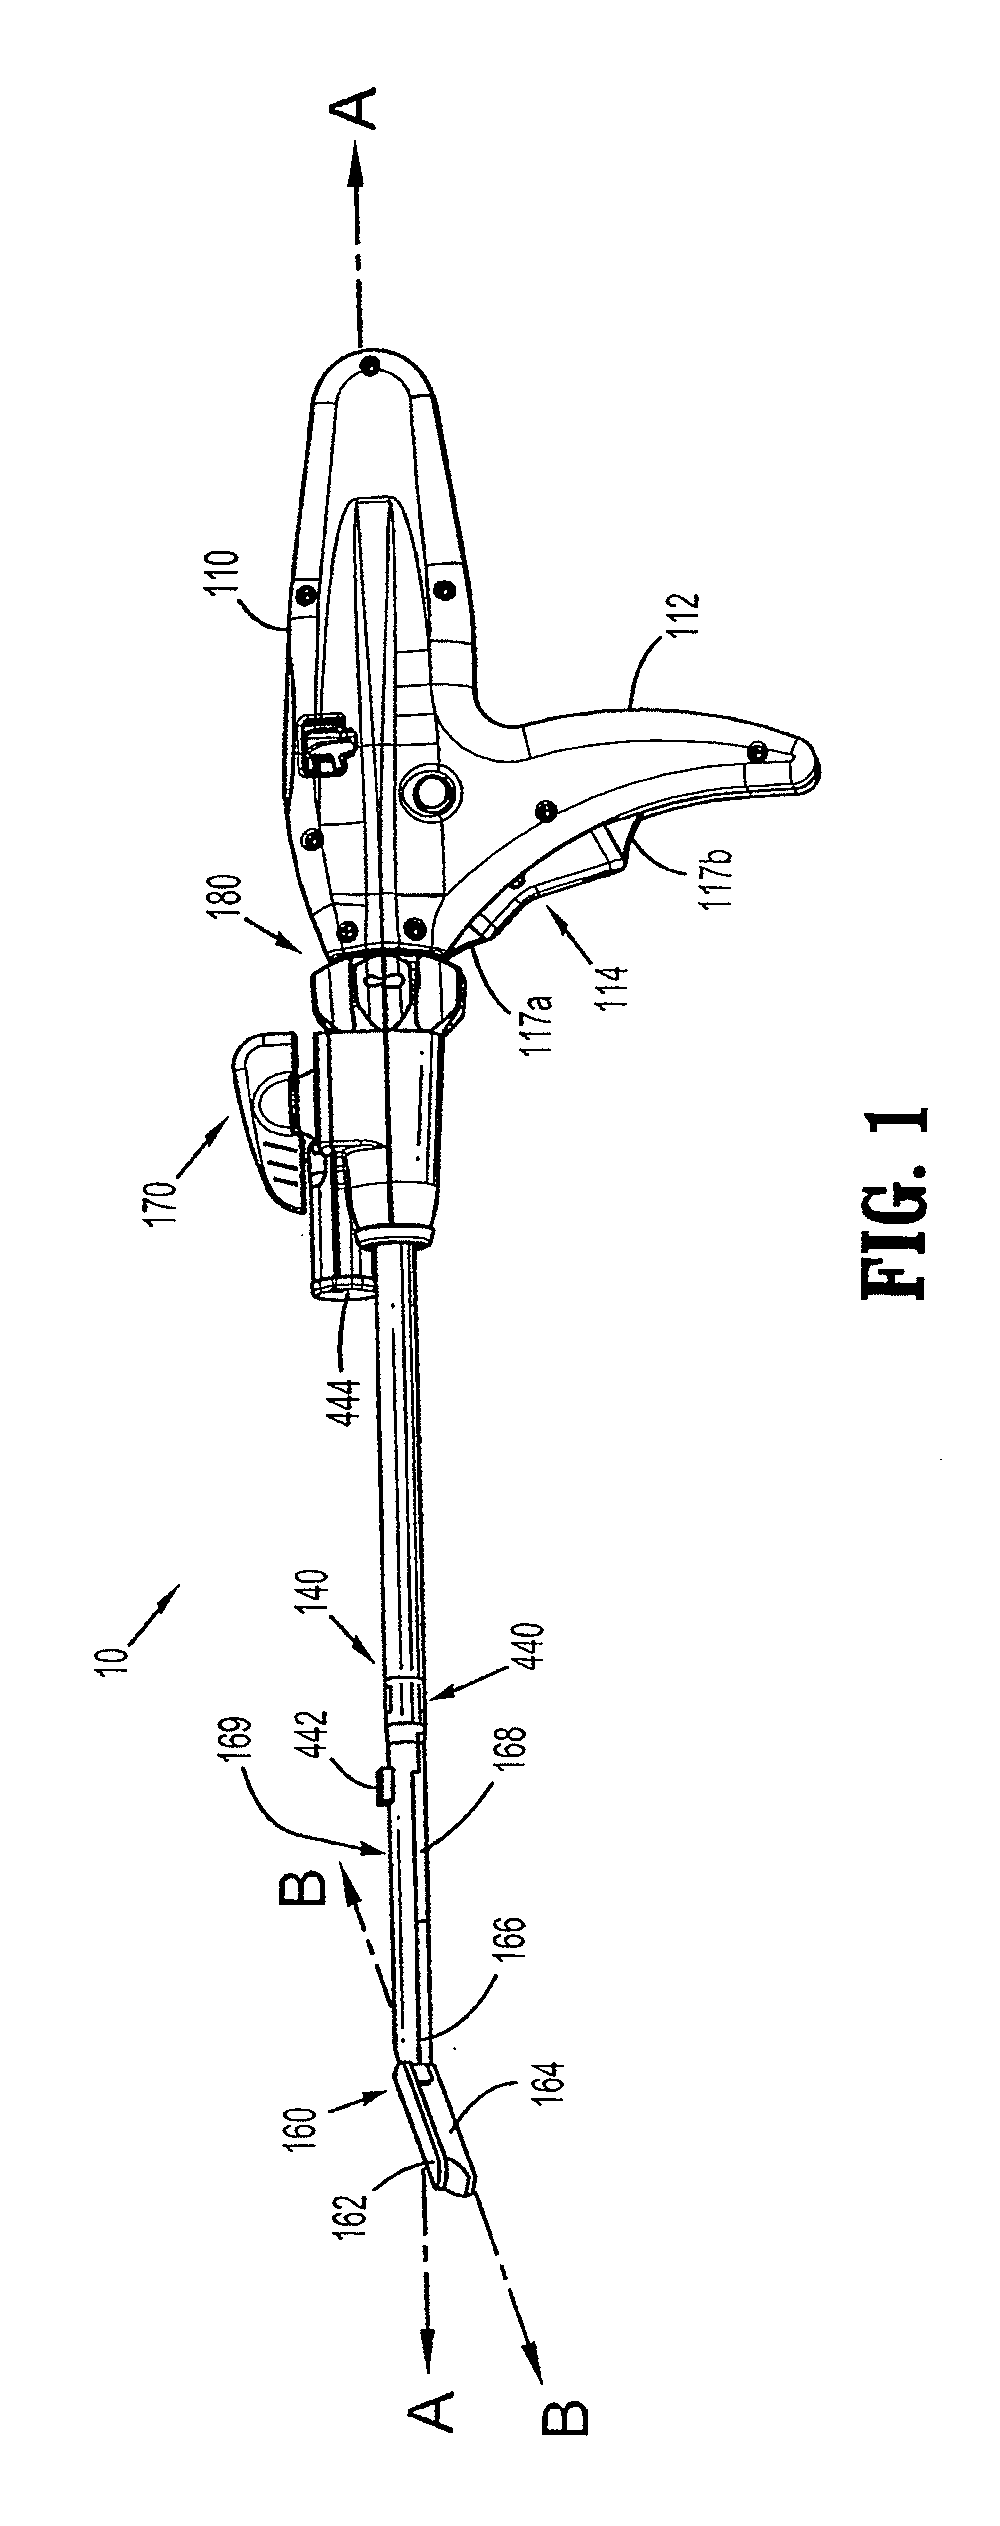 Battery ejection design for a surgical device